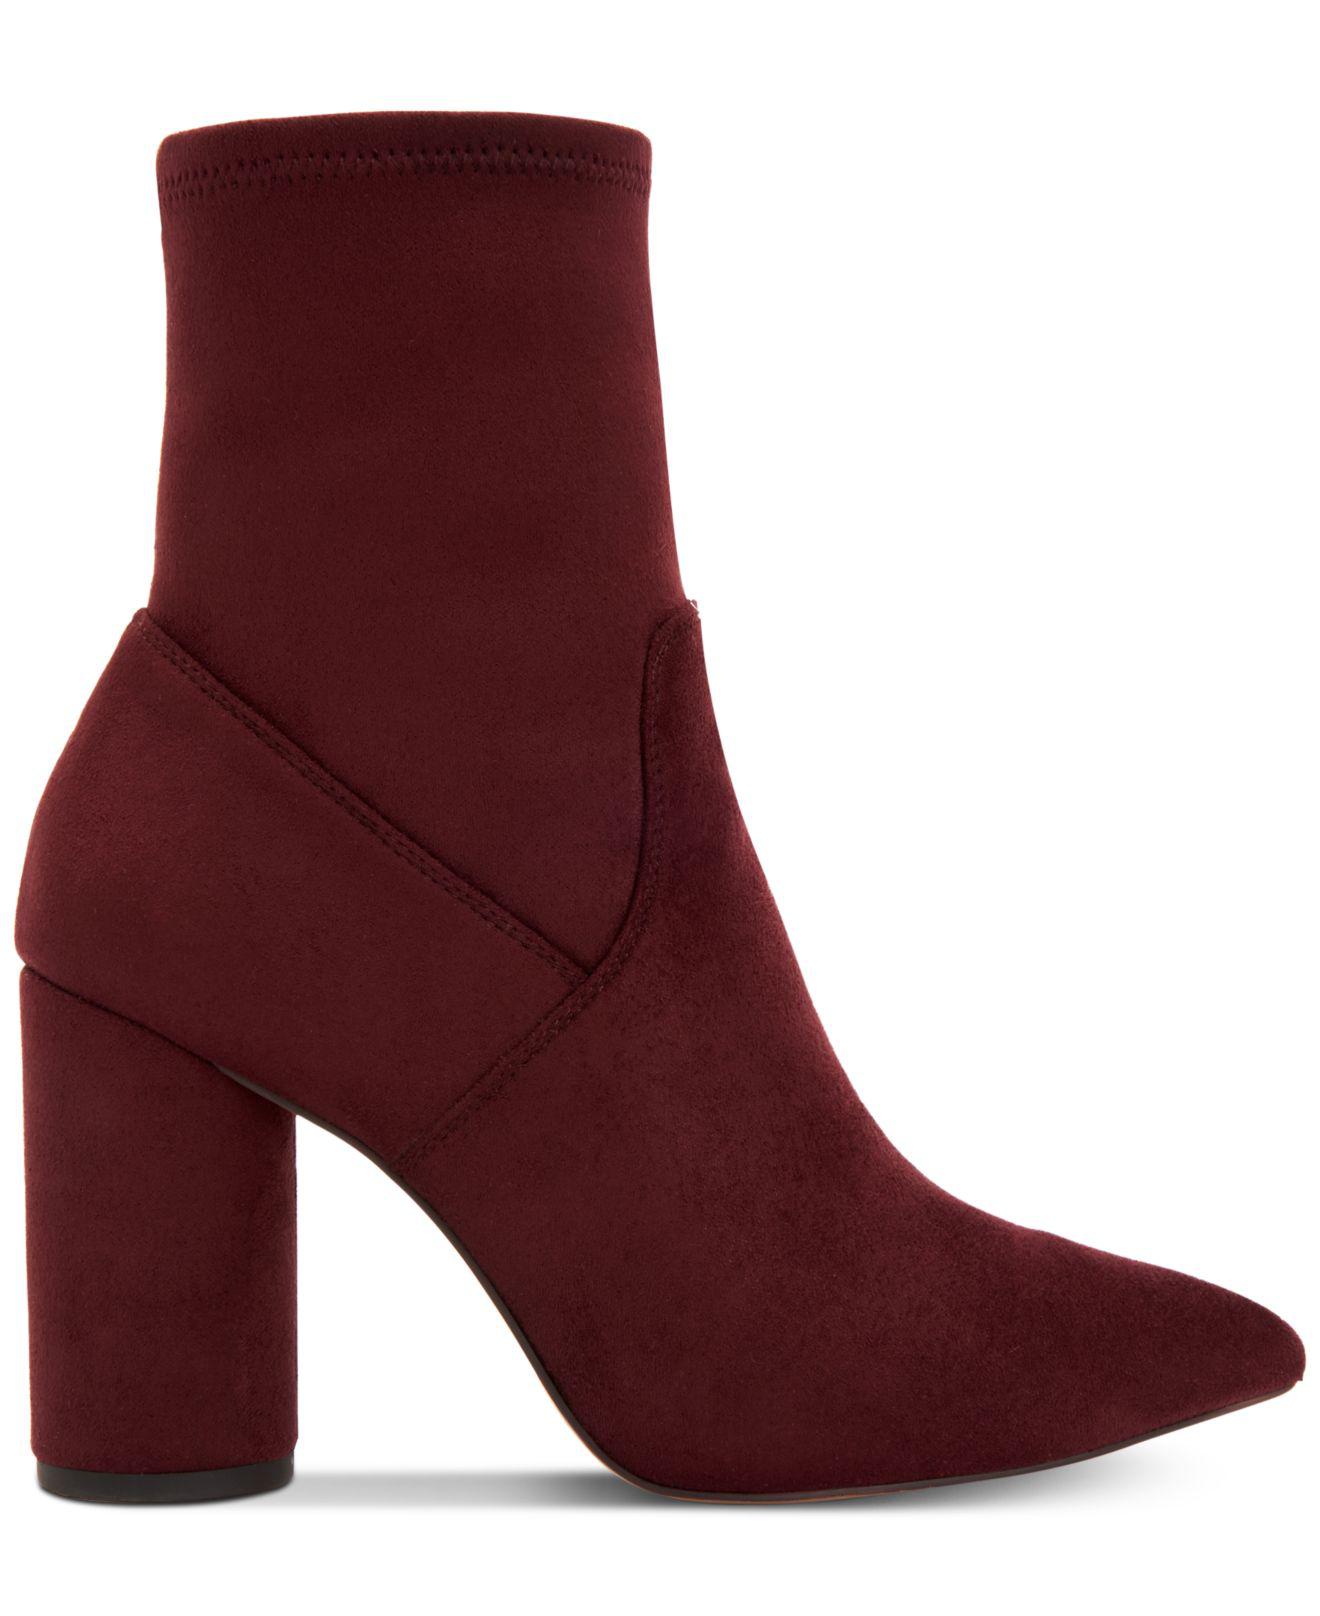 bcbgeneration ally pointy toe dress booties